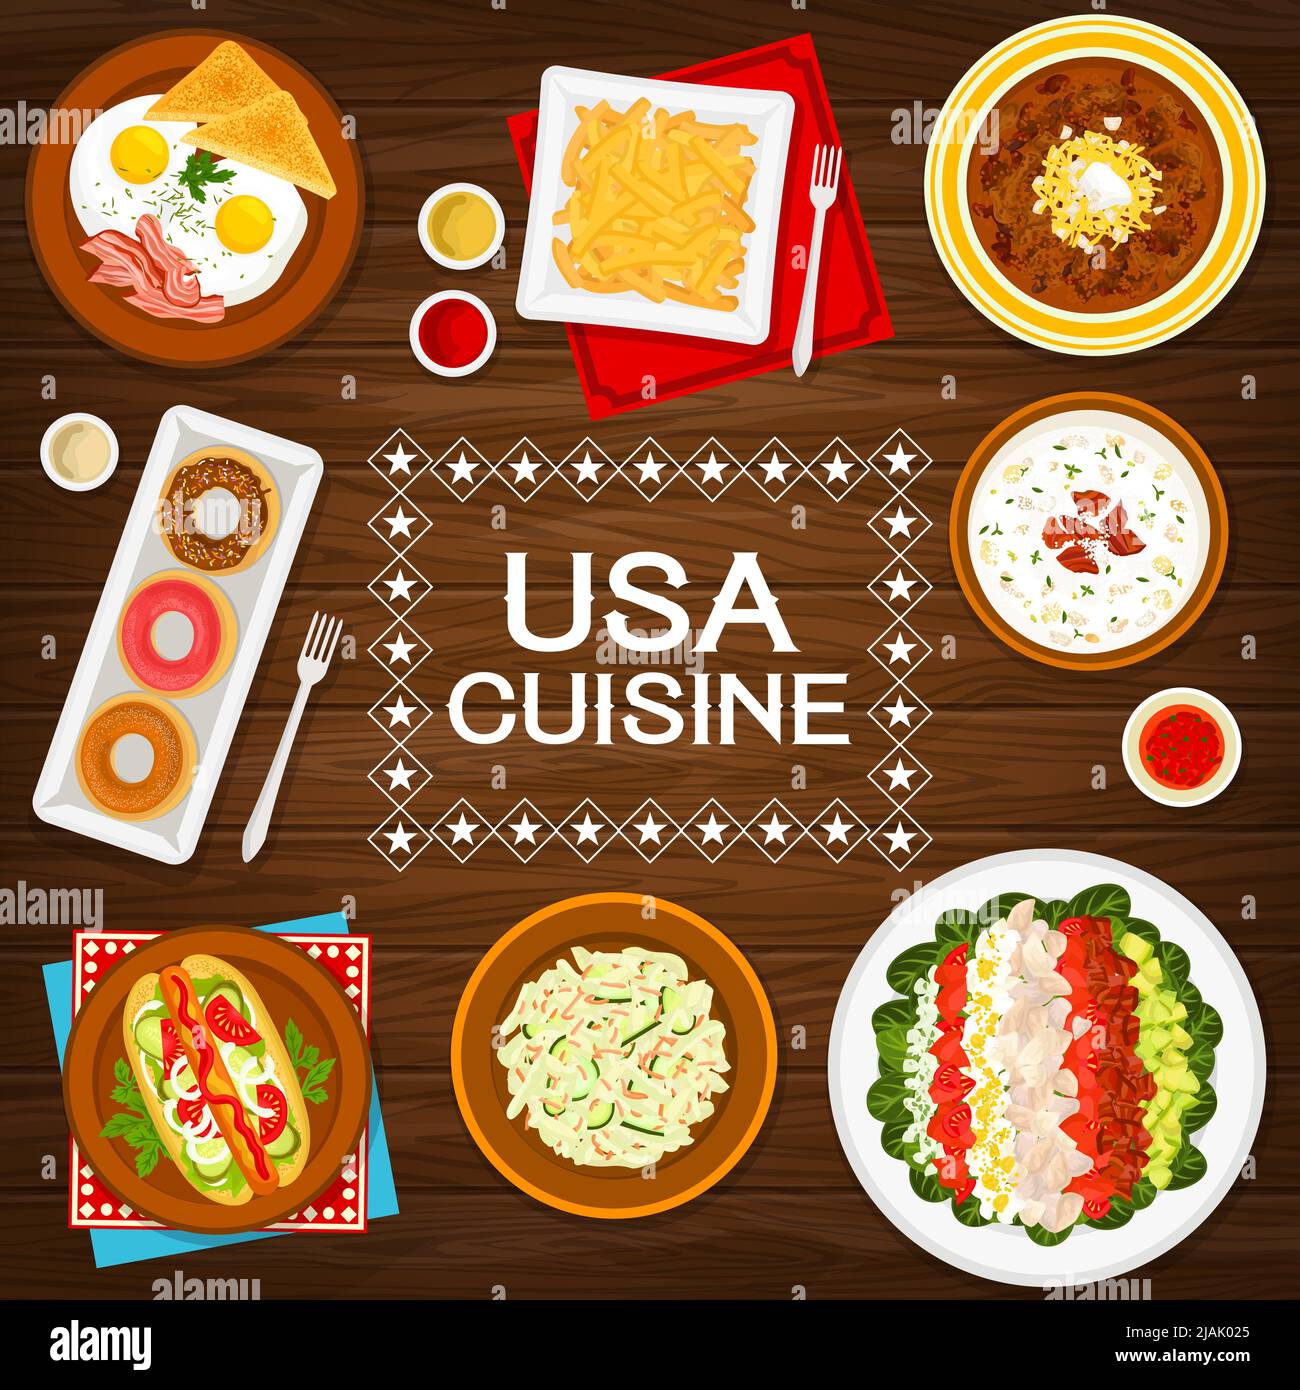 USA cuisine menu cover, American restaurant food breakfast, lunch and dinner dishes, vector. US American traditional food menu of baked beans and fried eggs with bacon, hot dog and cucumber salad Stock Vector